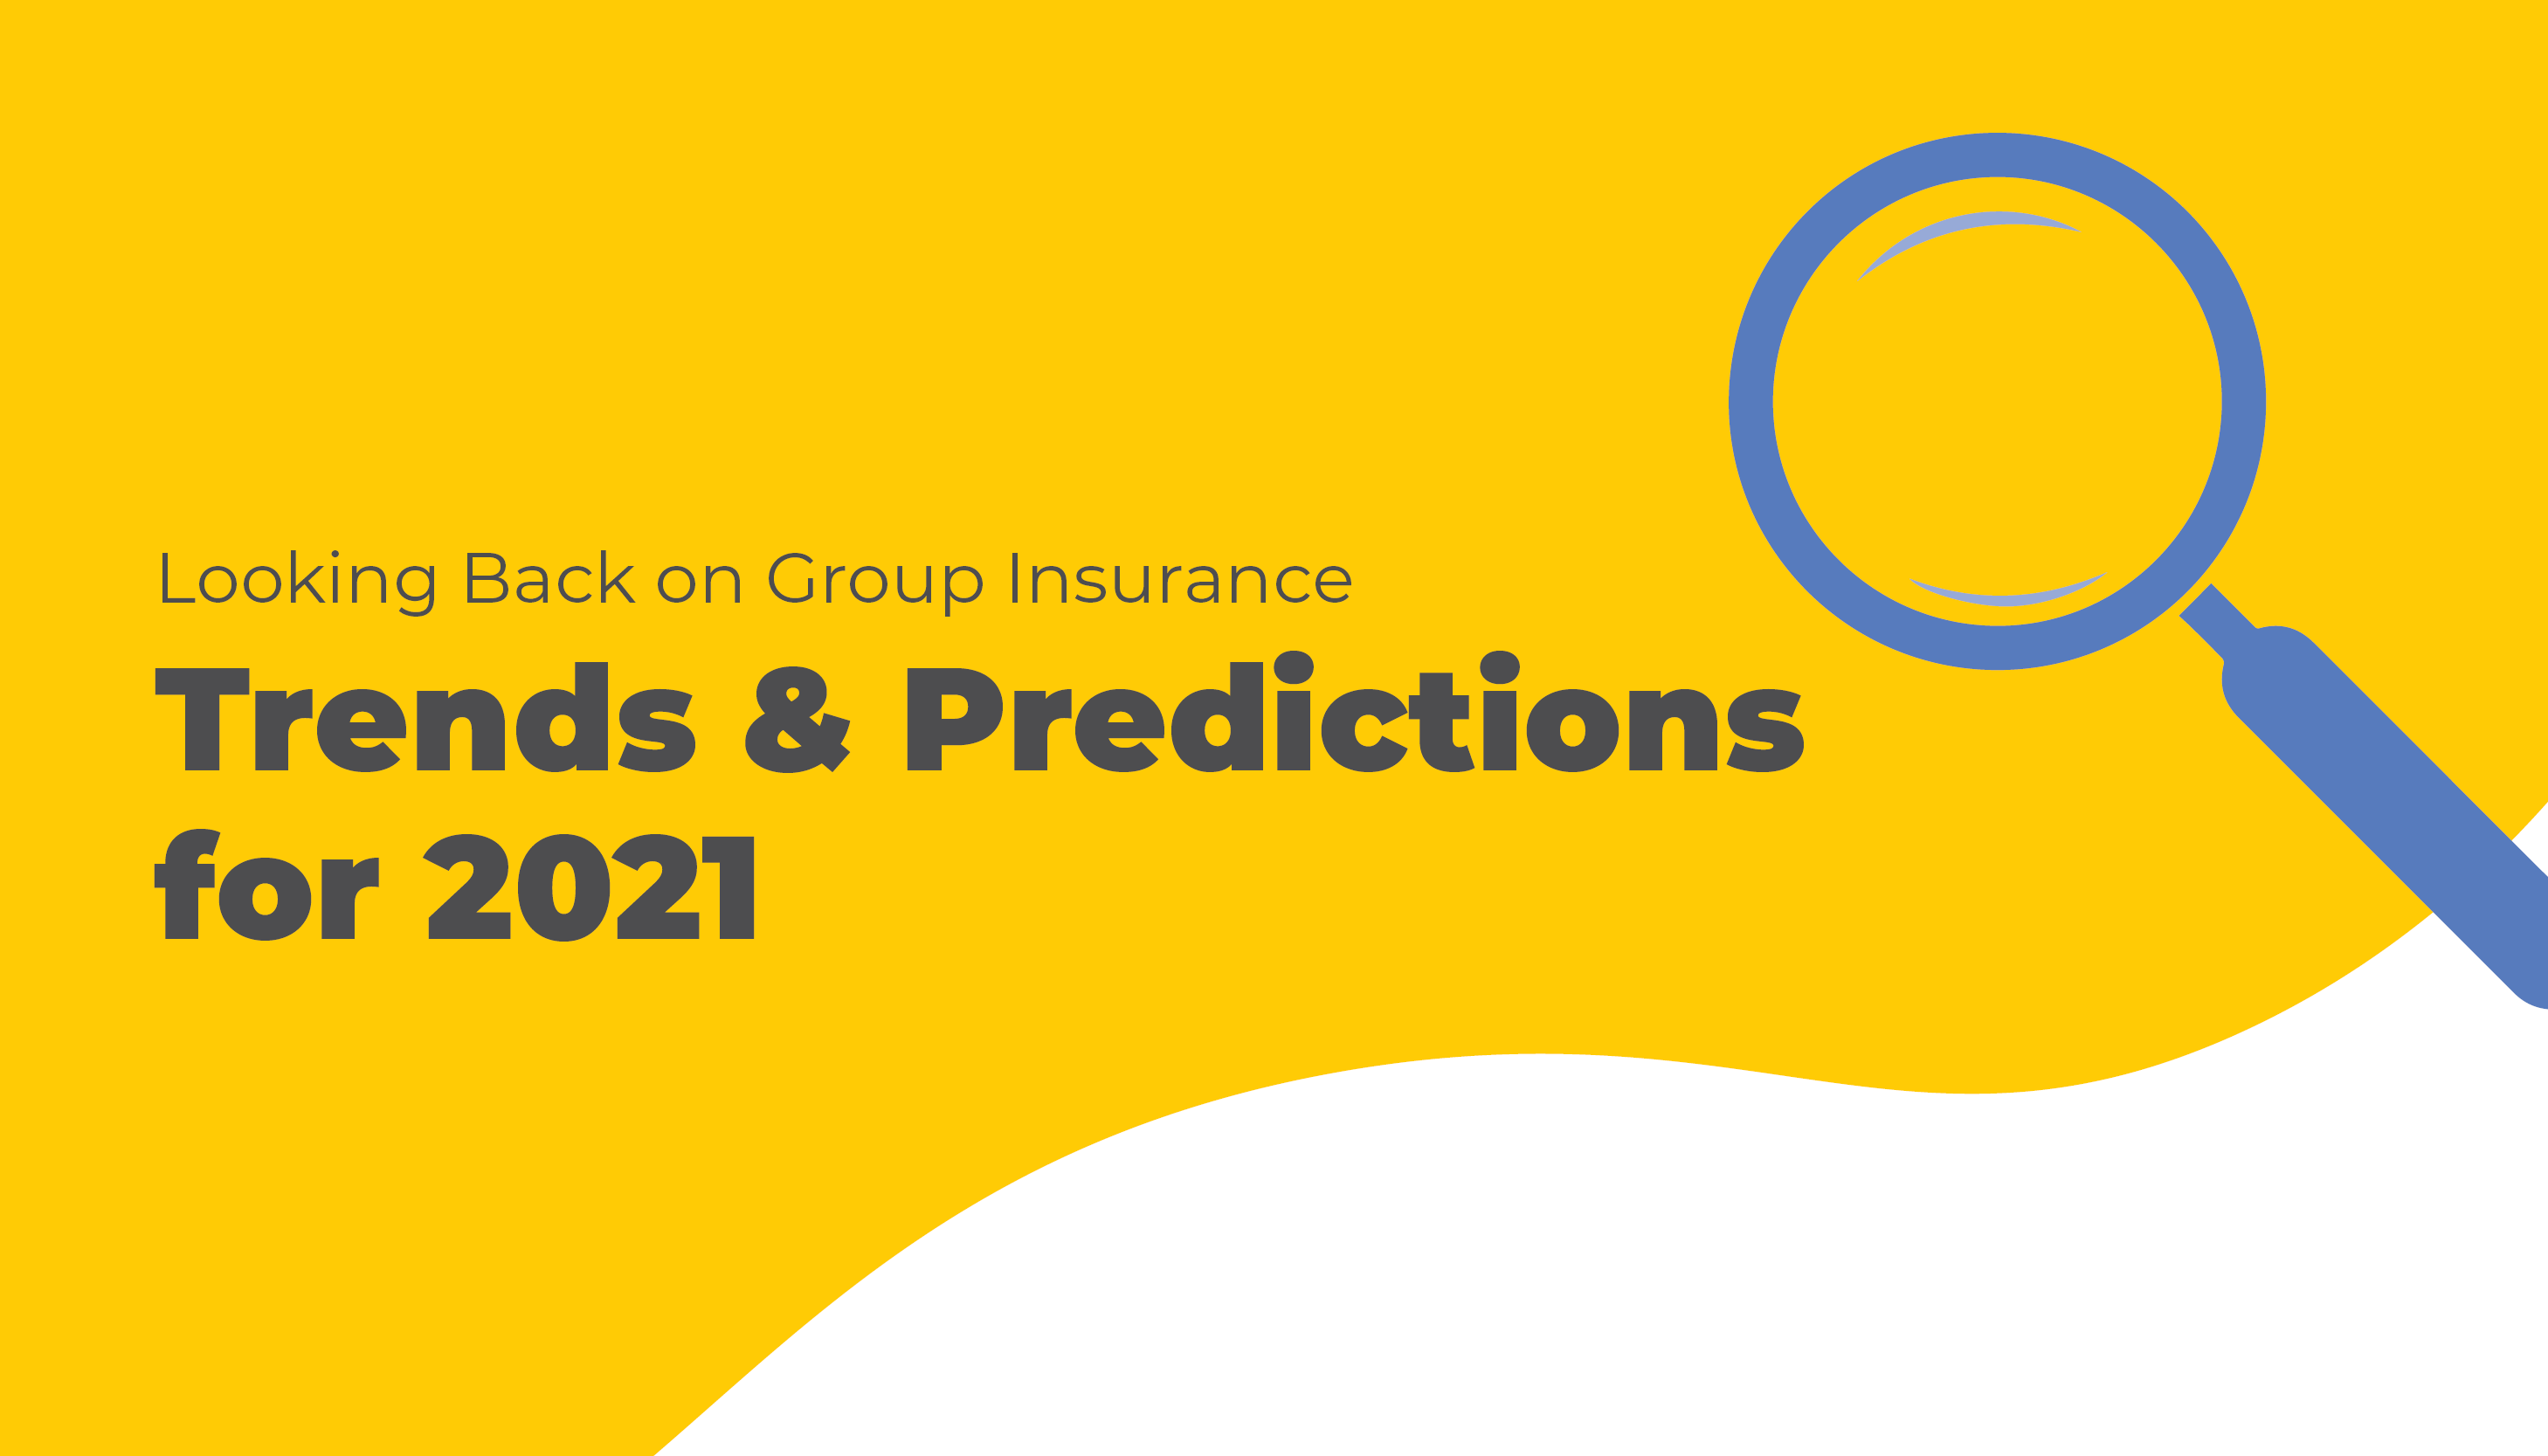 Looking Back on the Trends and Predictions for 2021 | Benefits by Design